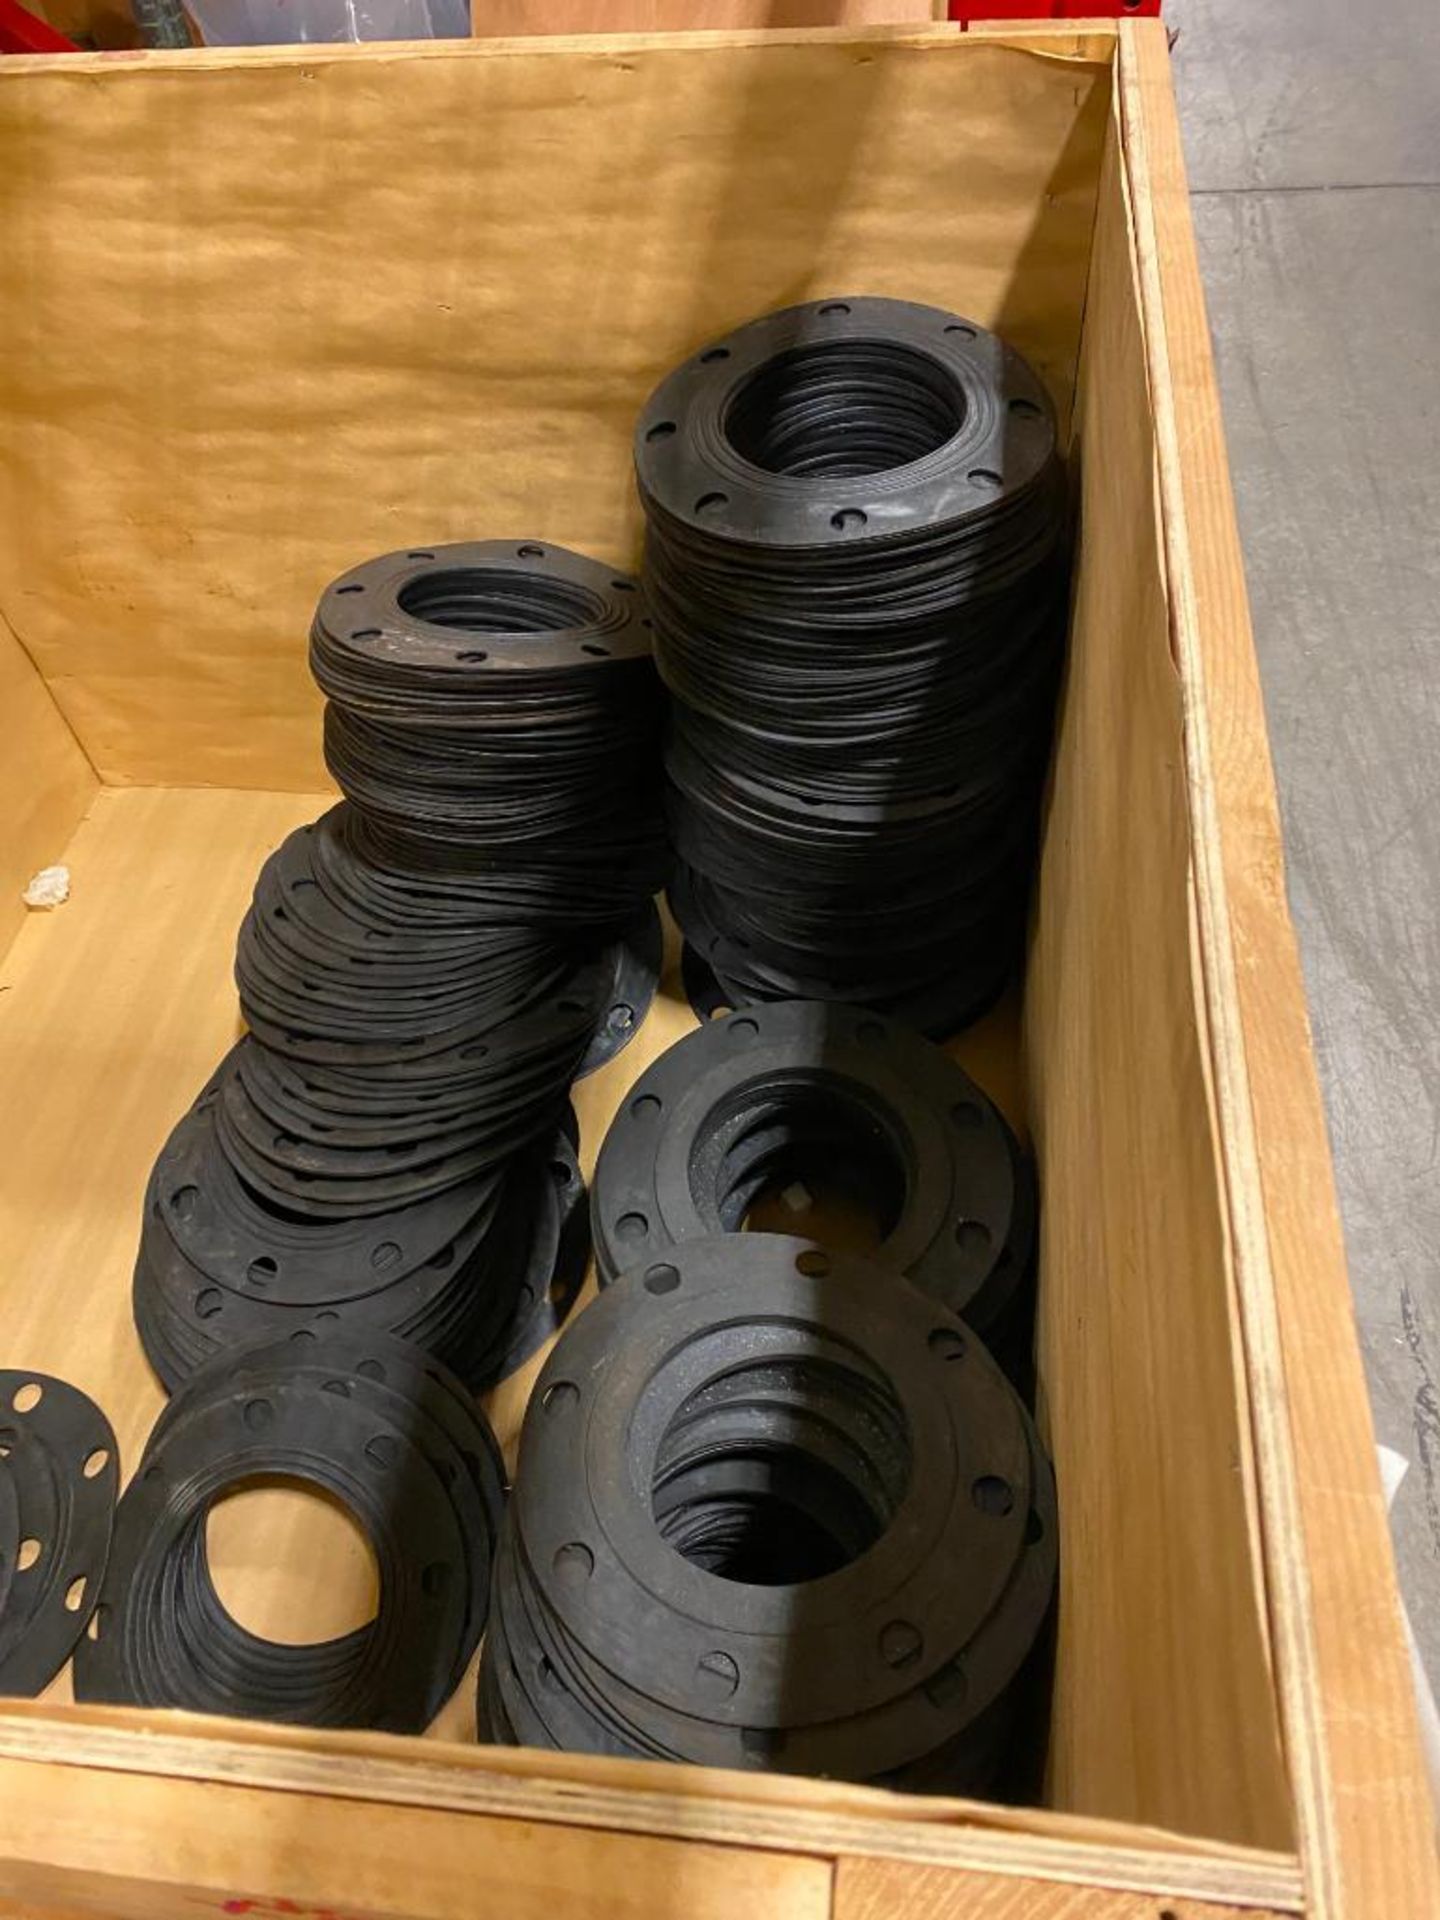 (10) Skids of Assorted Rubber Gaskets, Flange Rings & Pipe Covers, Bo Metals Void Caps, Coated Bolts - Image 11 of 11